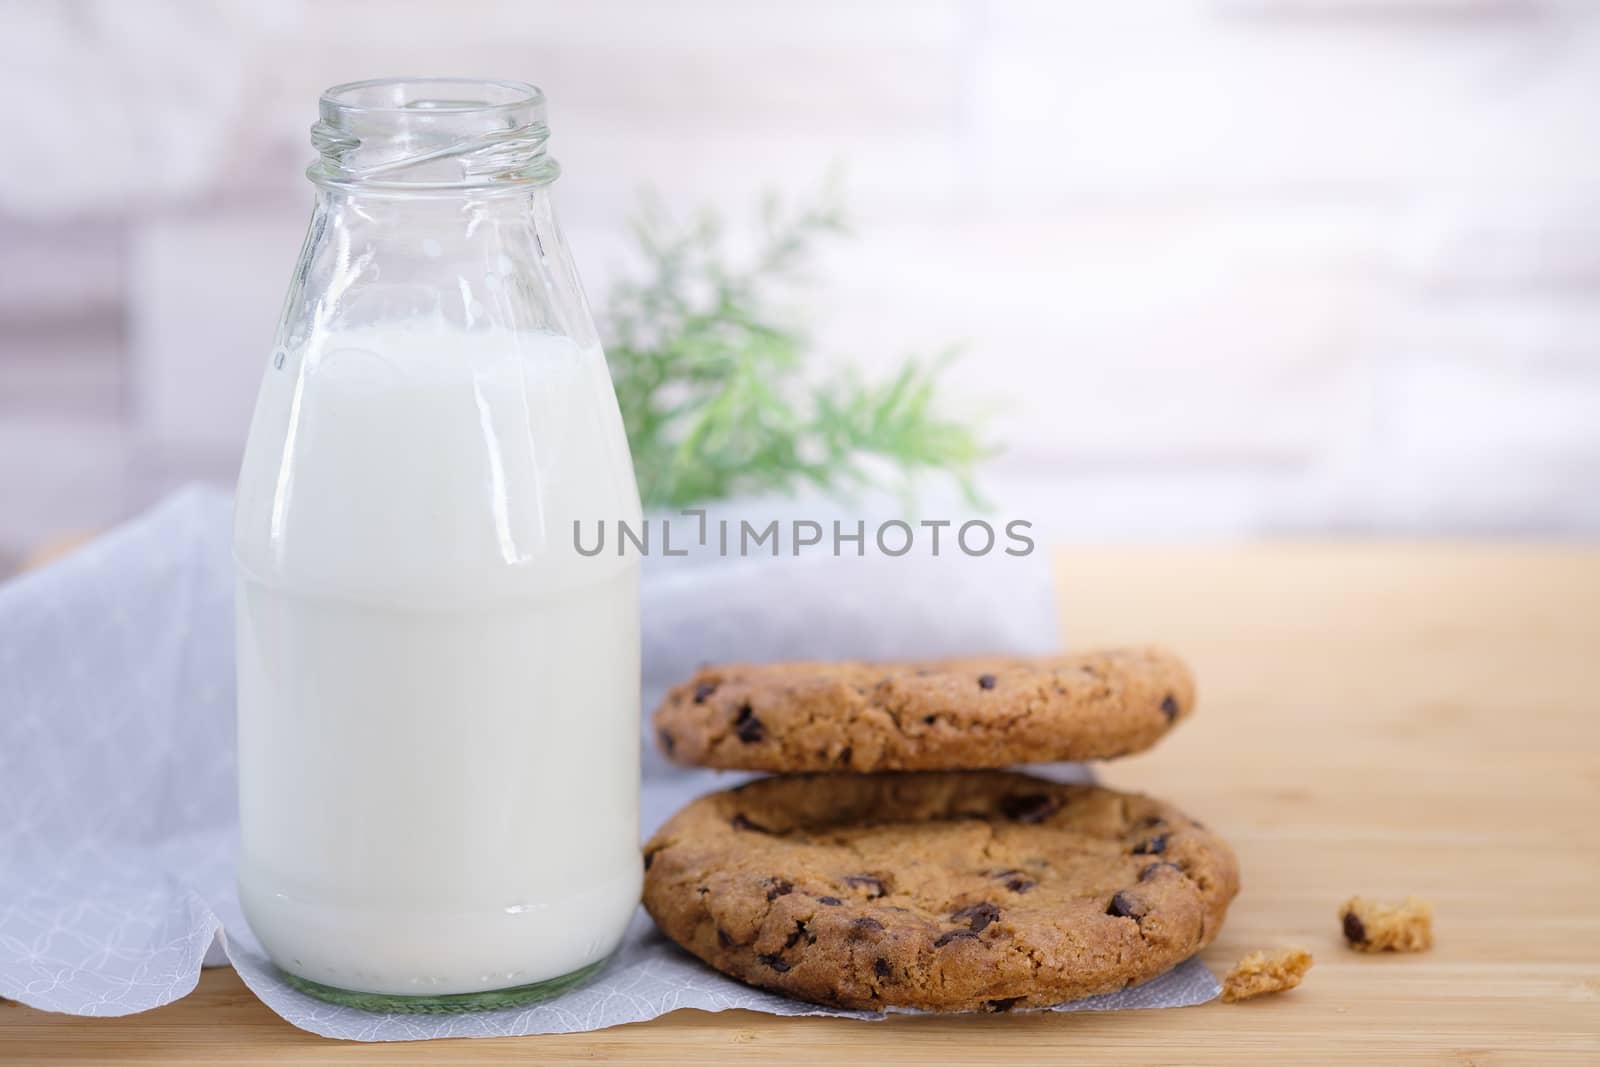 Chocolate chip cookies and a bottle of milk on a  wooden table, Vintage look.